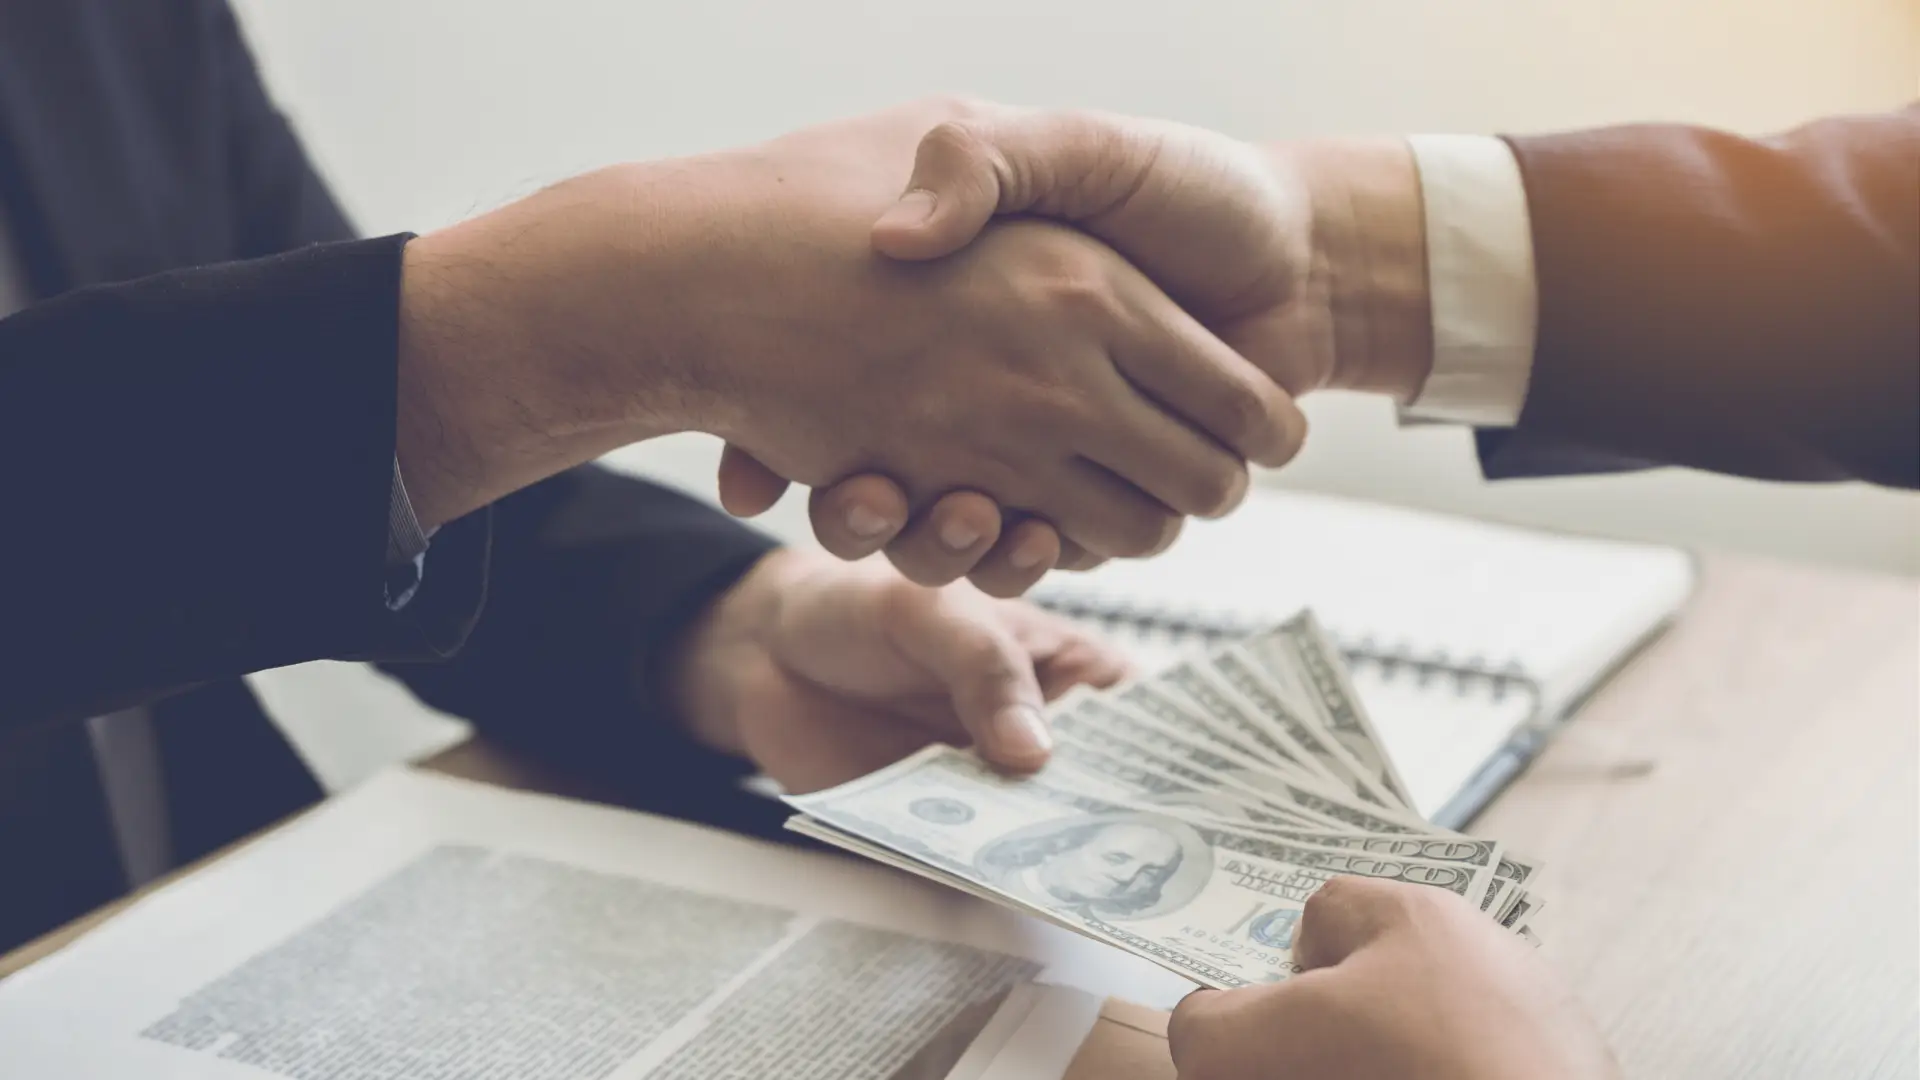 adoption lawyer handing their client USD cash while shaking their hand.